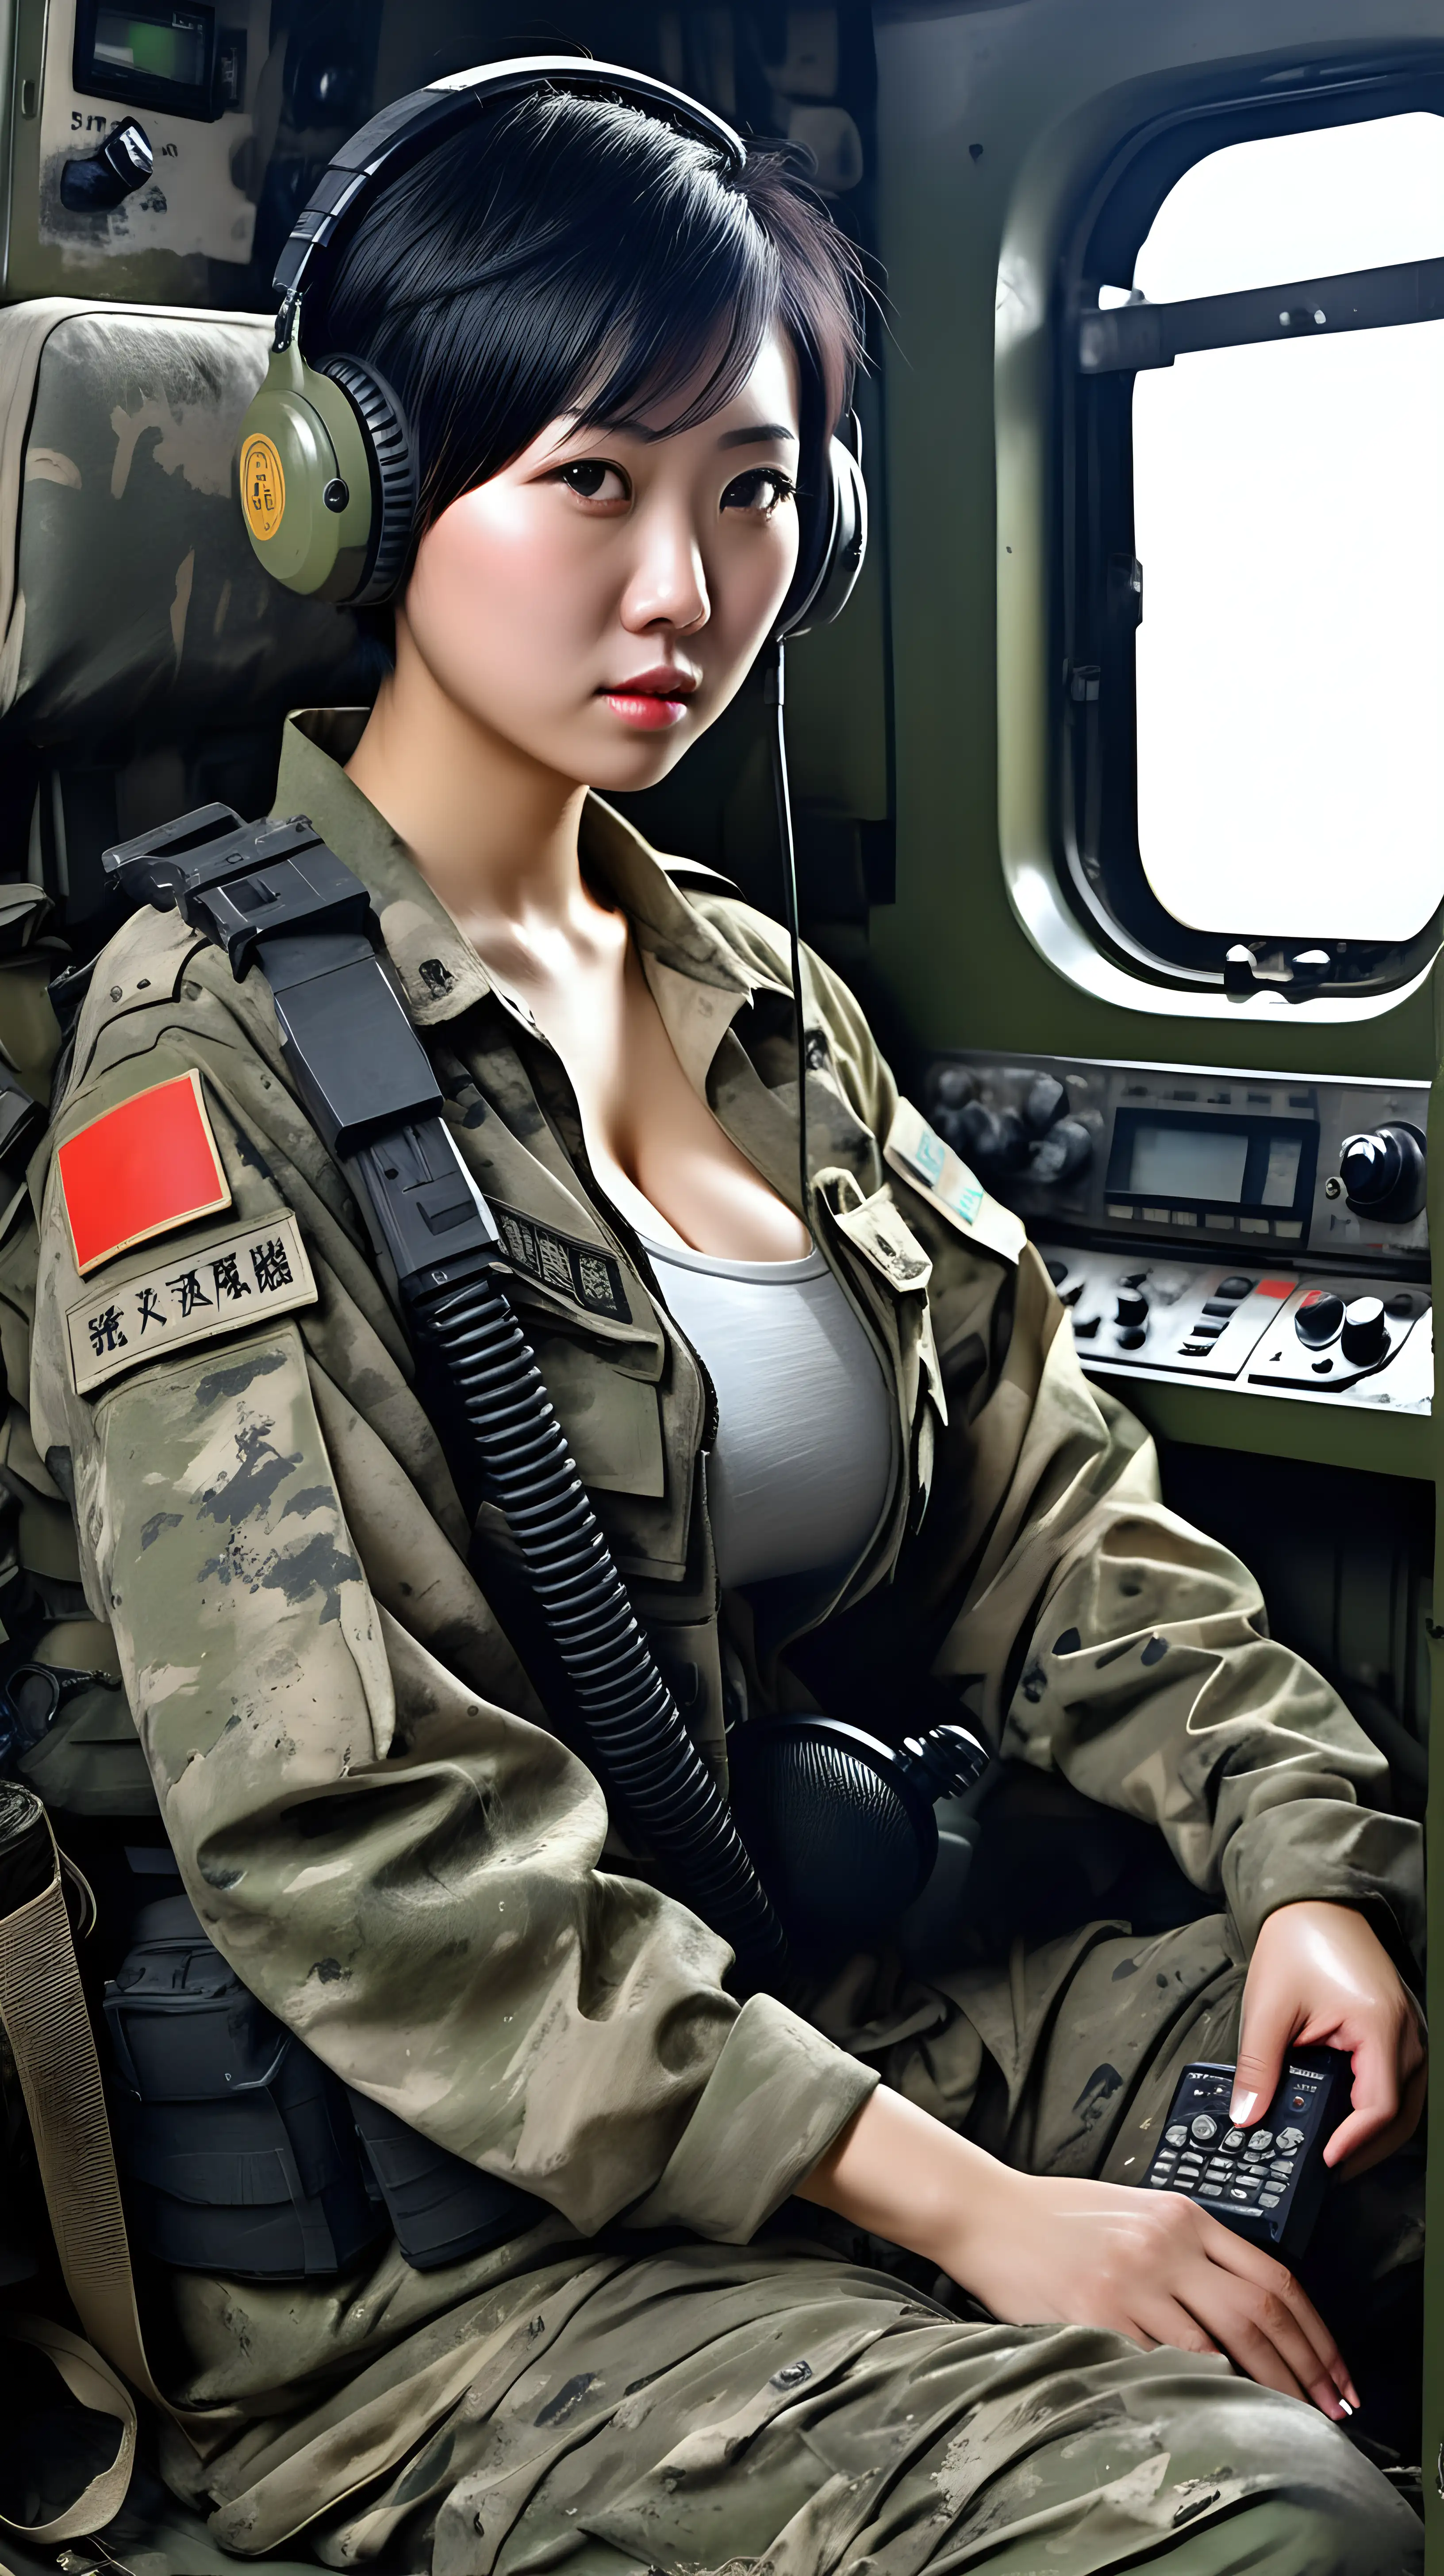 Dedicated Chinese Female Soldier in Action